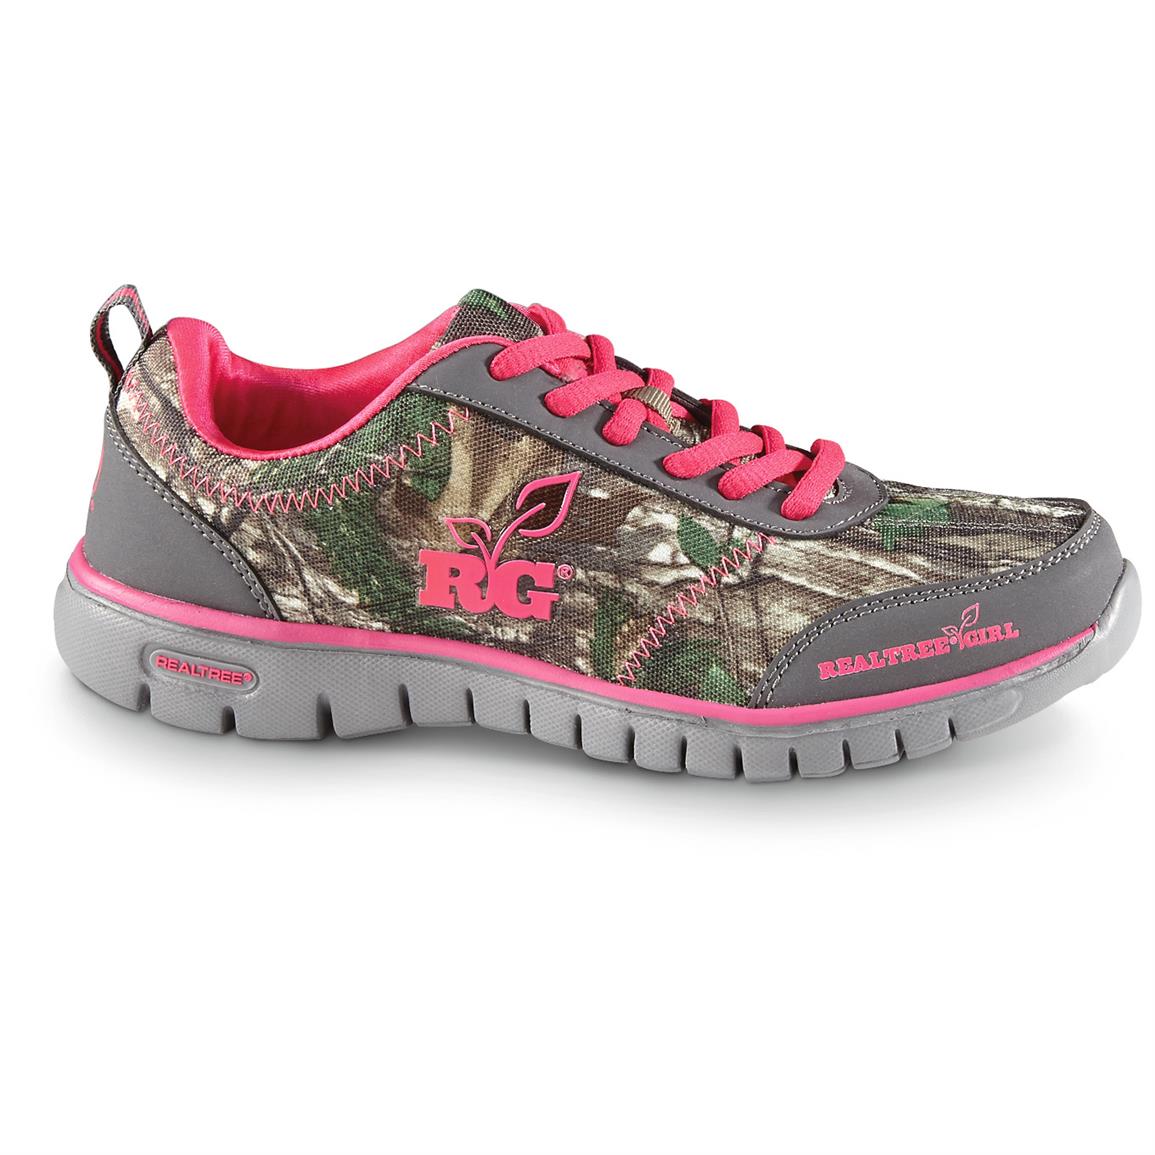 realtree girl pink camo shoes